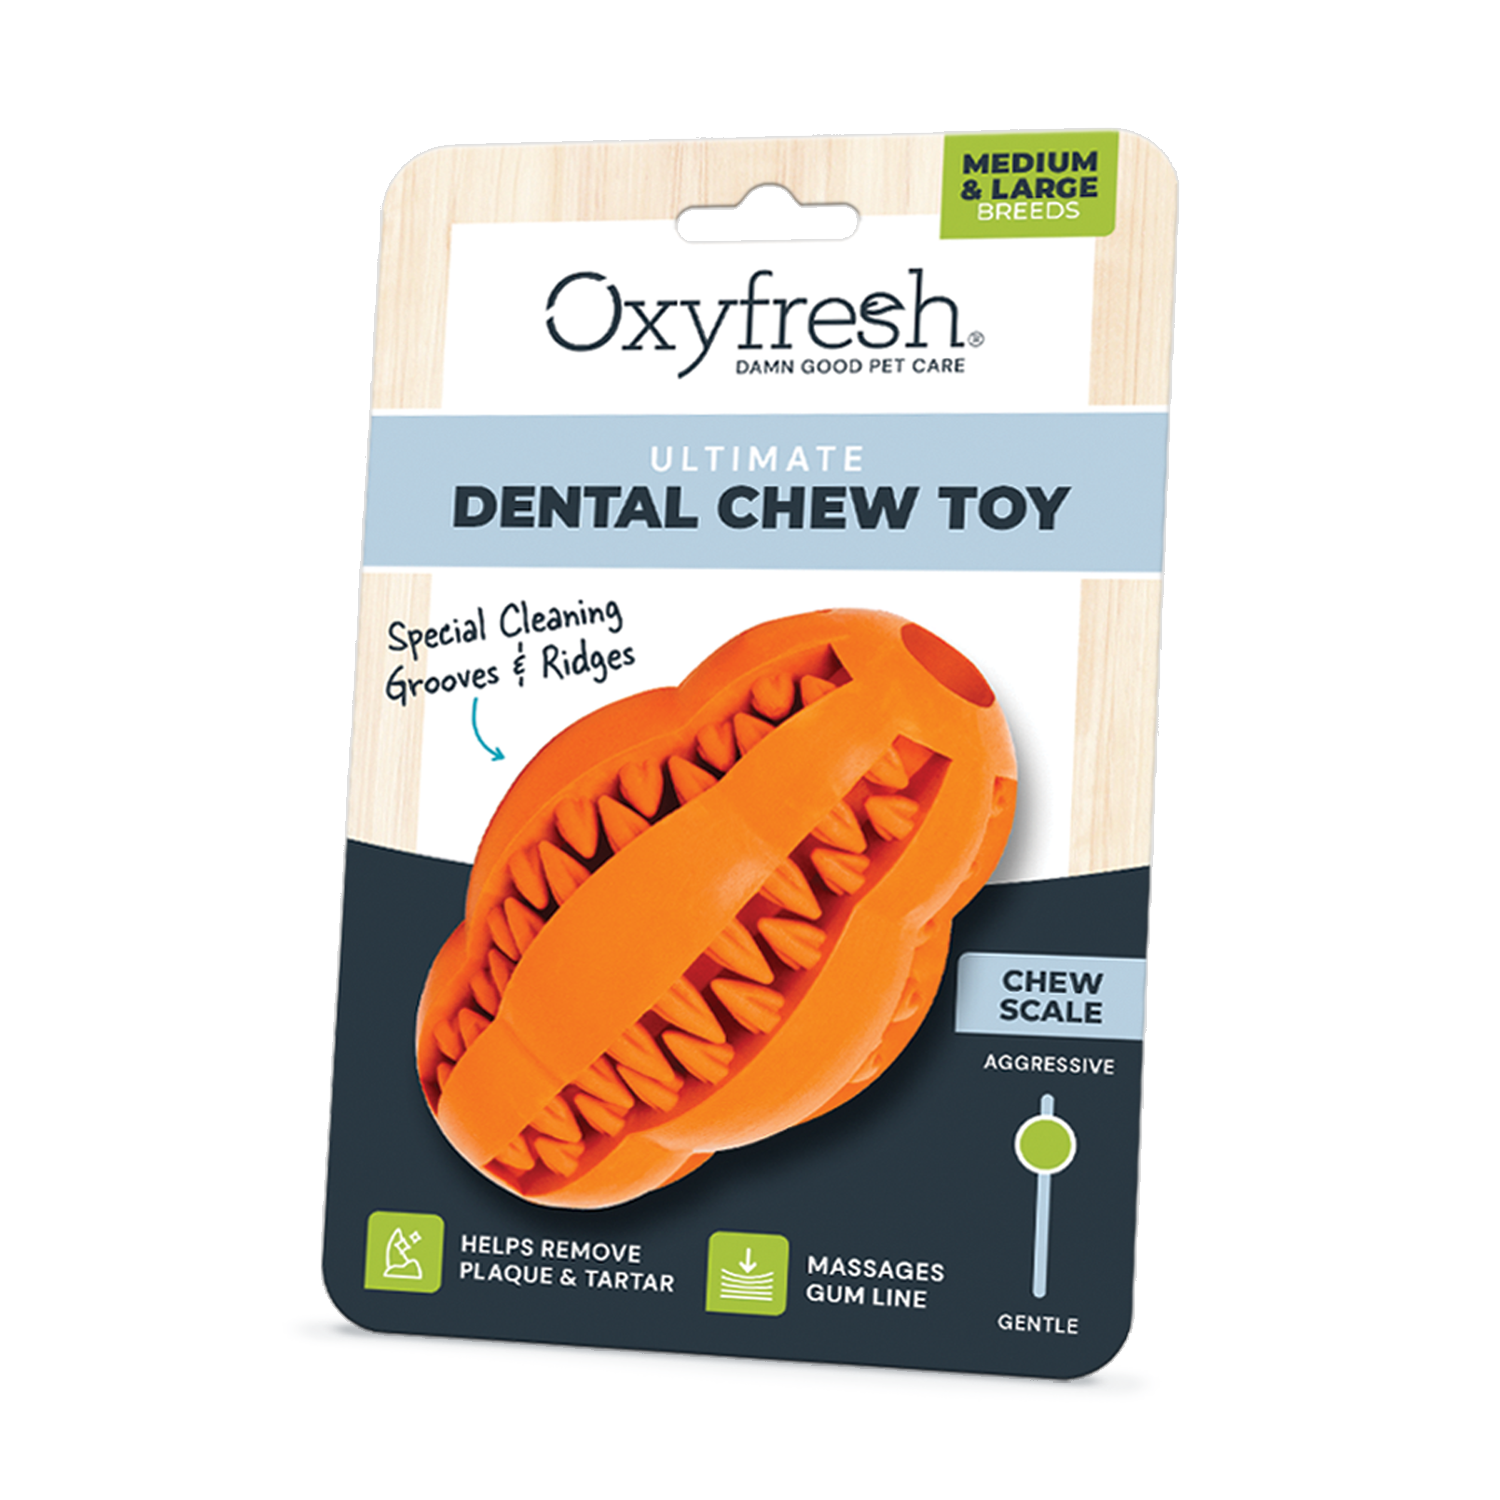 100% Natural Rubber Dog Dental Toy – Fun, Easy Way to Clean Dog Teeth